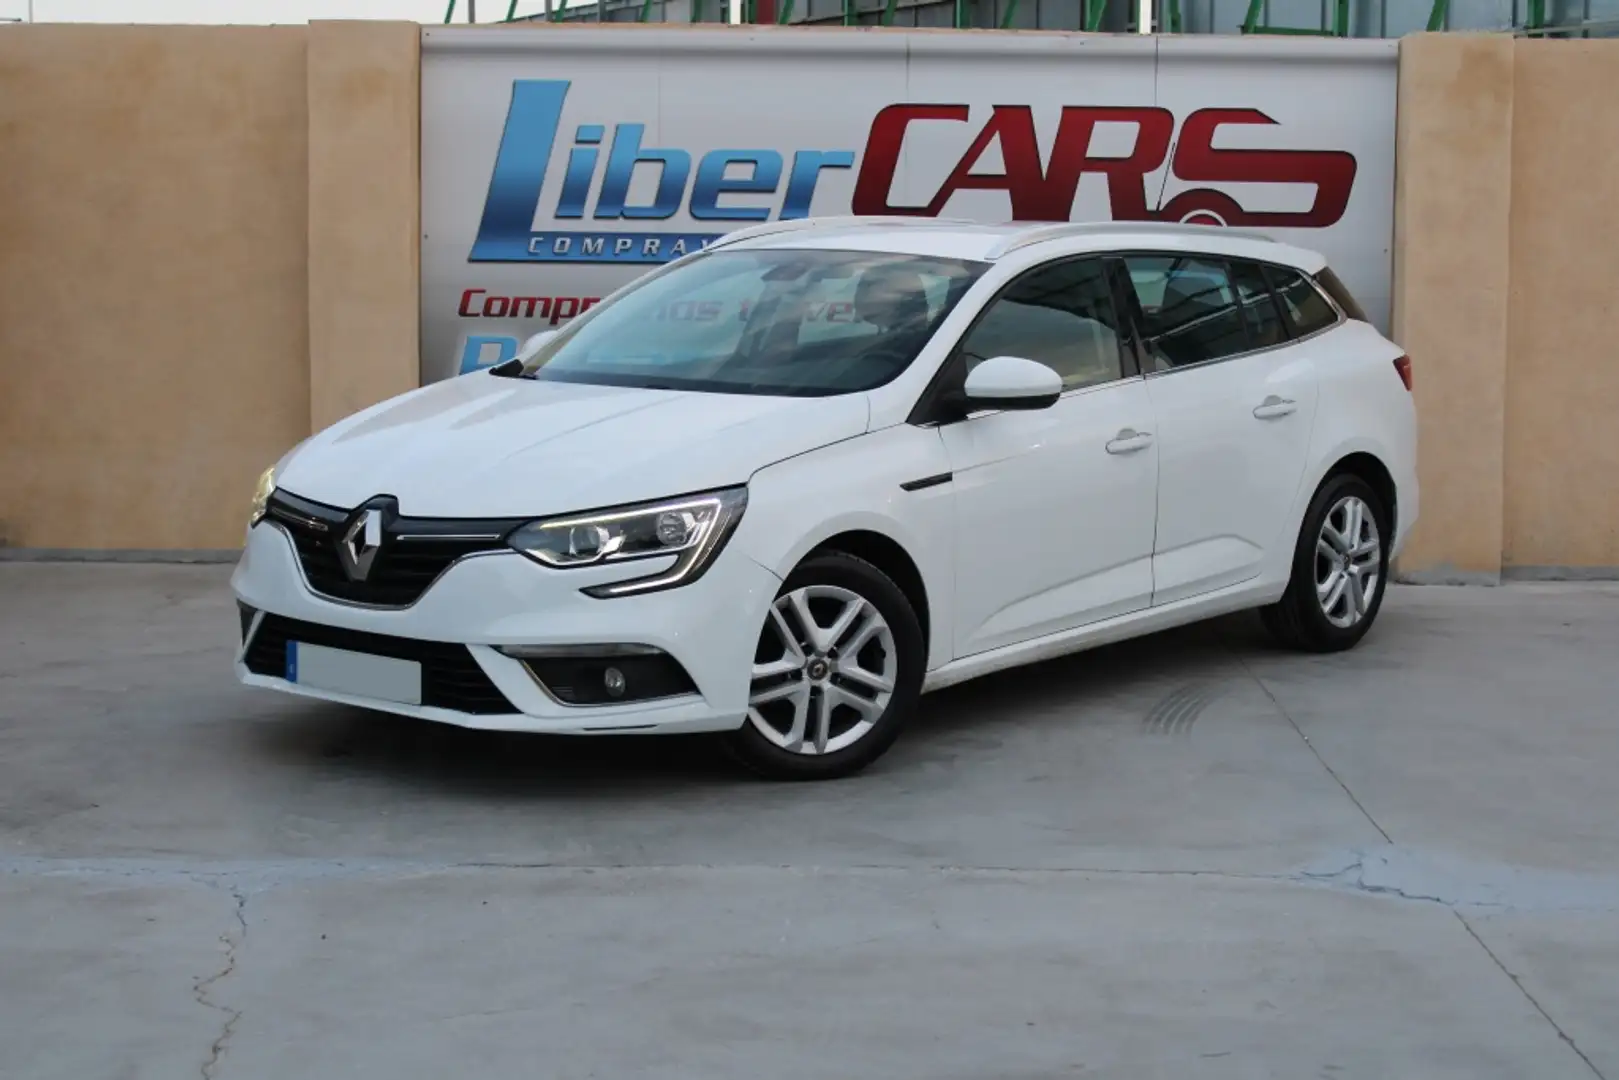 Renault Megane S.T. 1.5dCi Energy Business 81kW Wit - 1